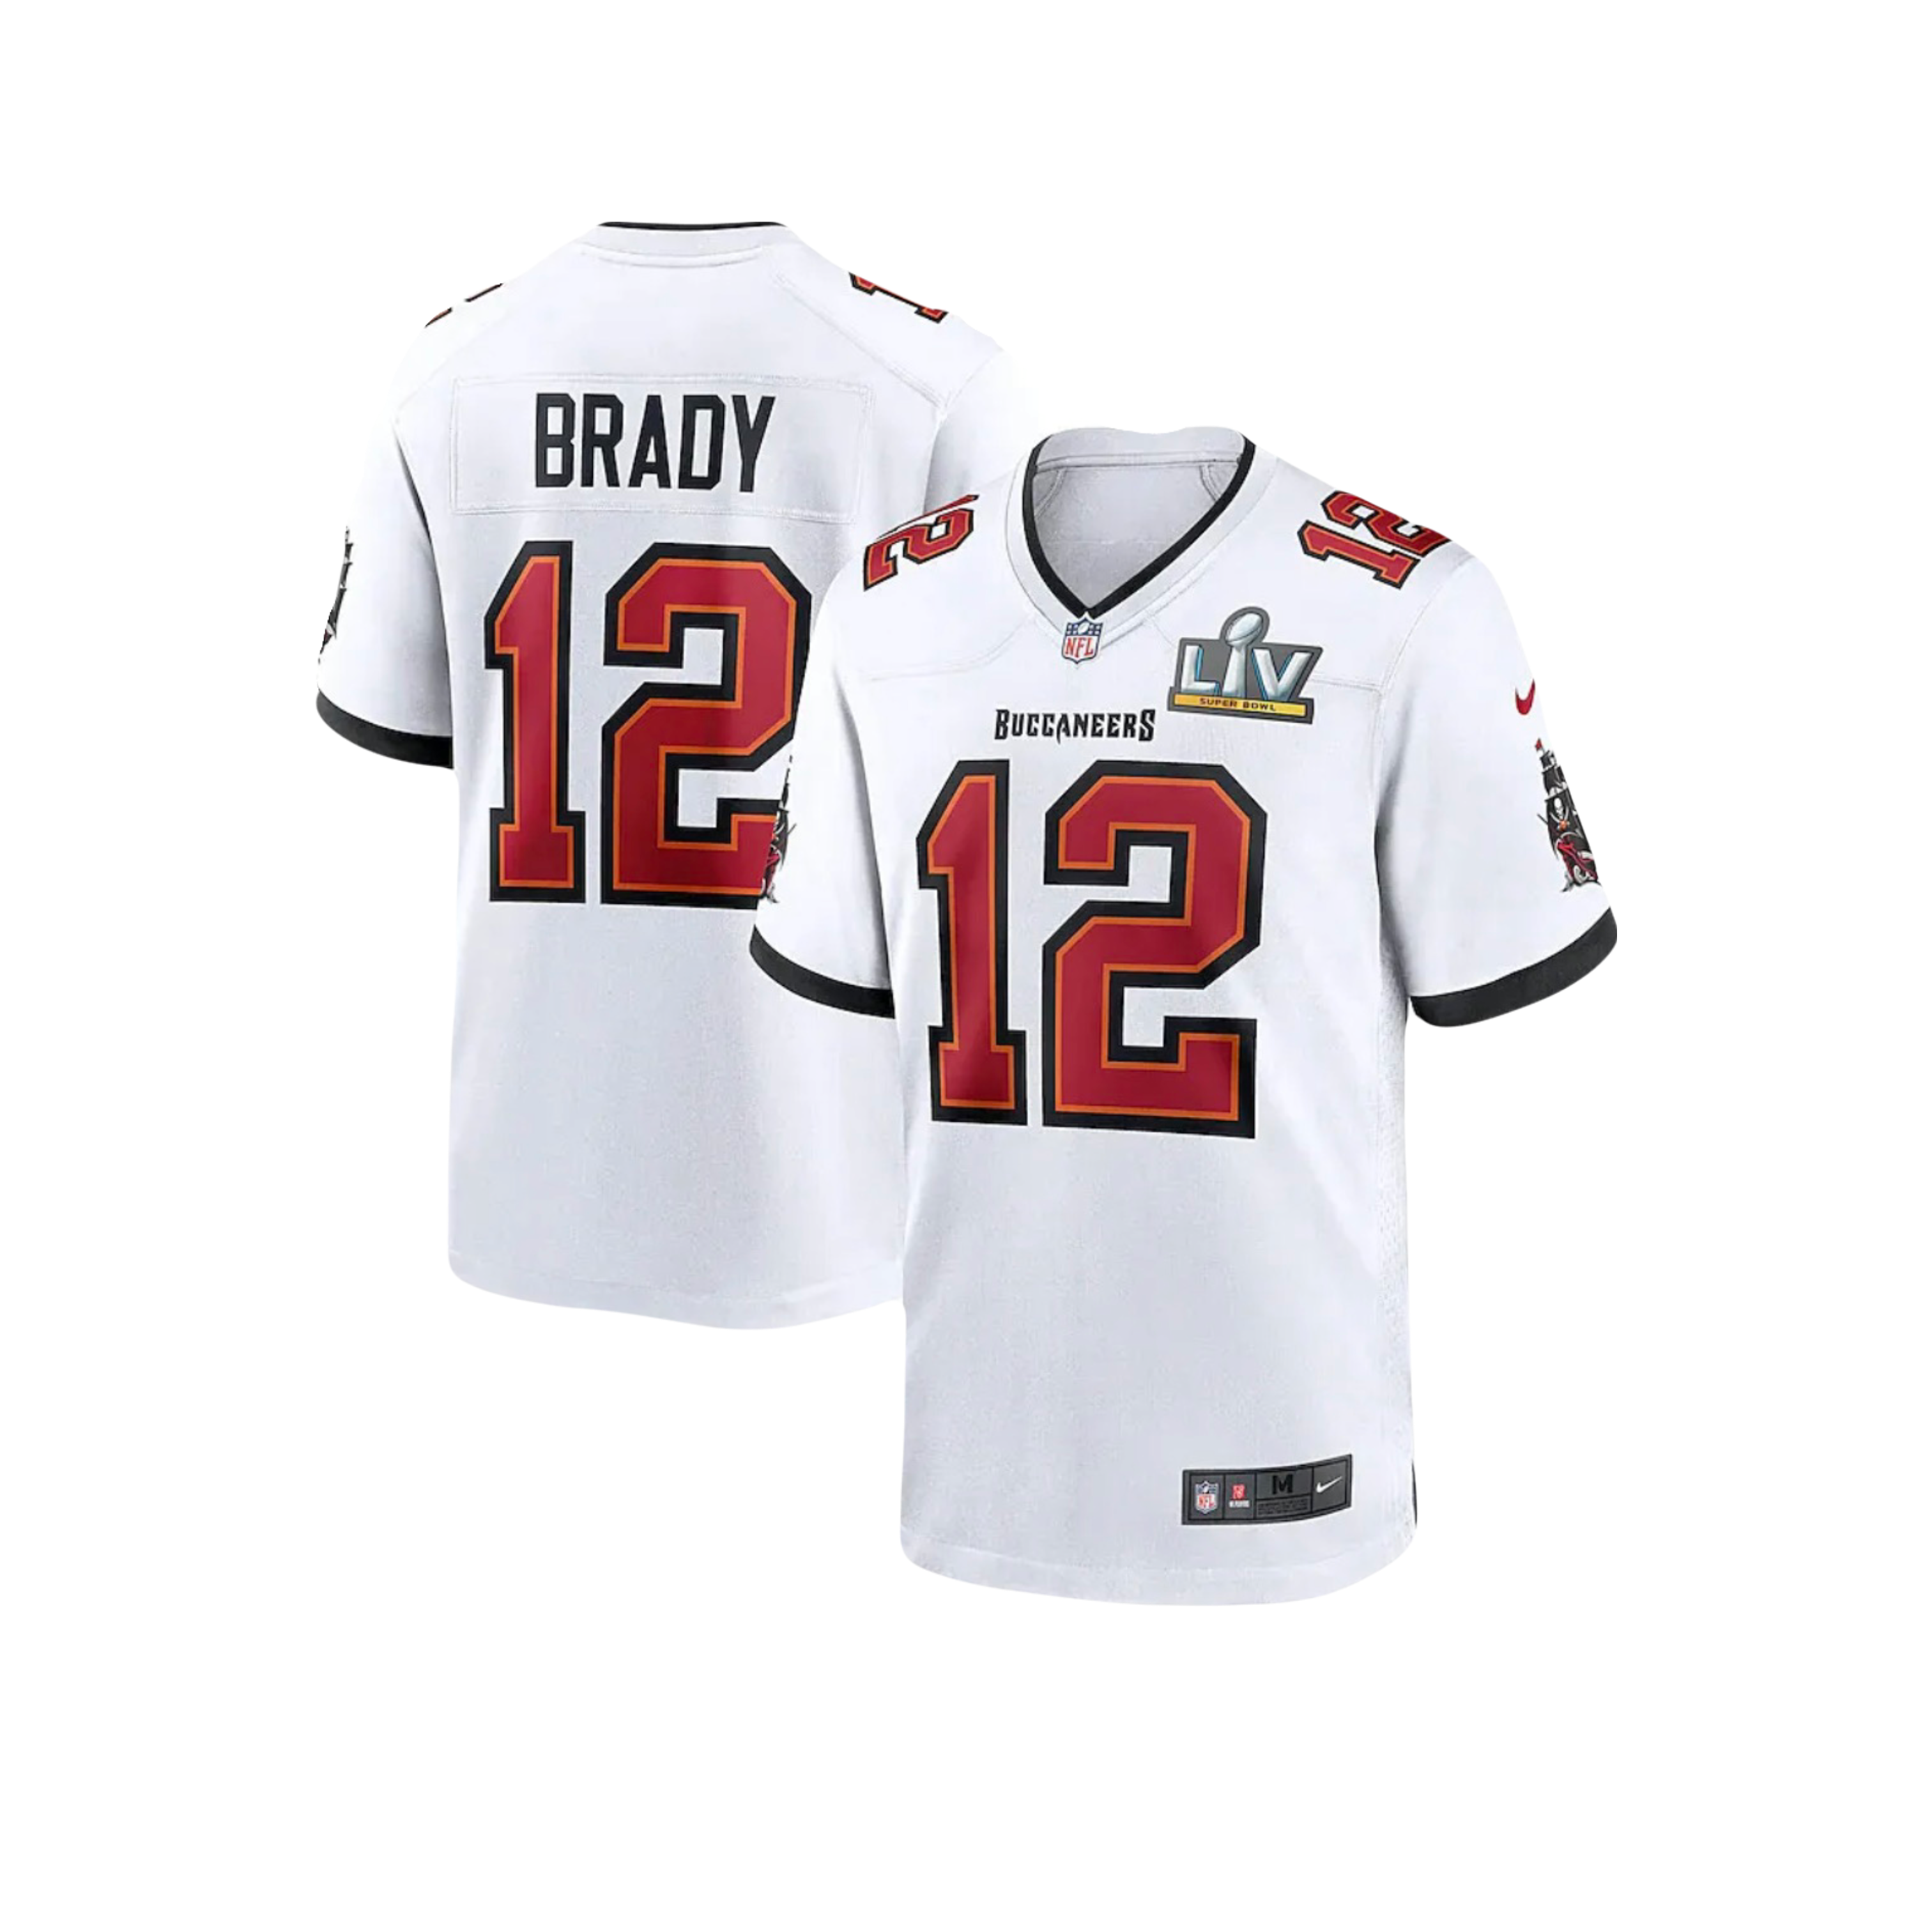 Tampa Bay Buccaneers gear: Where to buy Super Bowl Champion hats, shirts,  Tom Brady jerseys, masks, more 